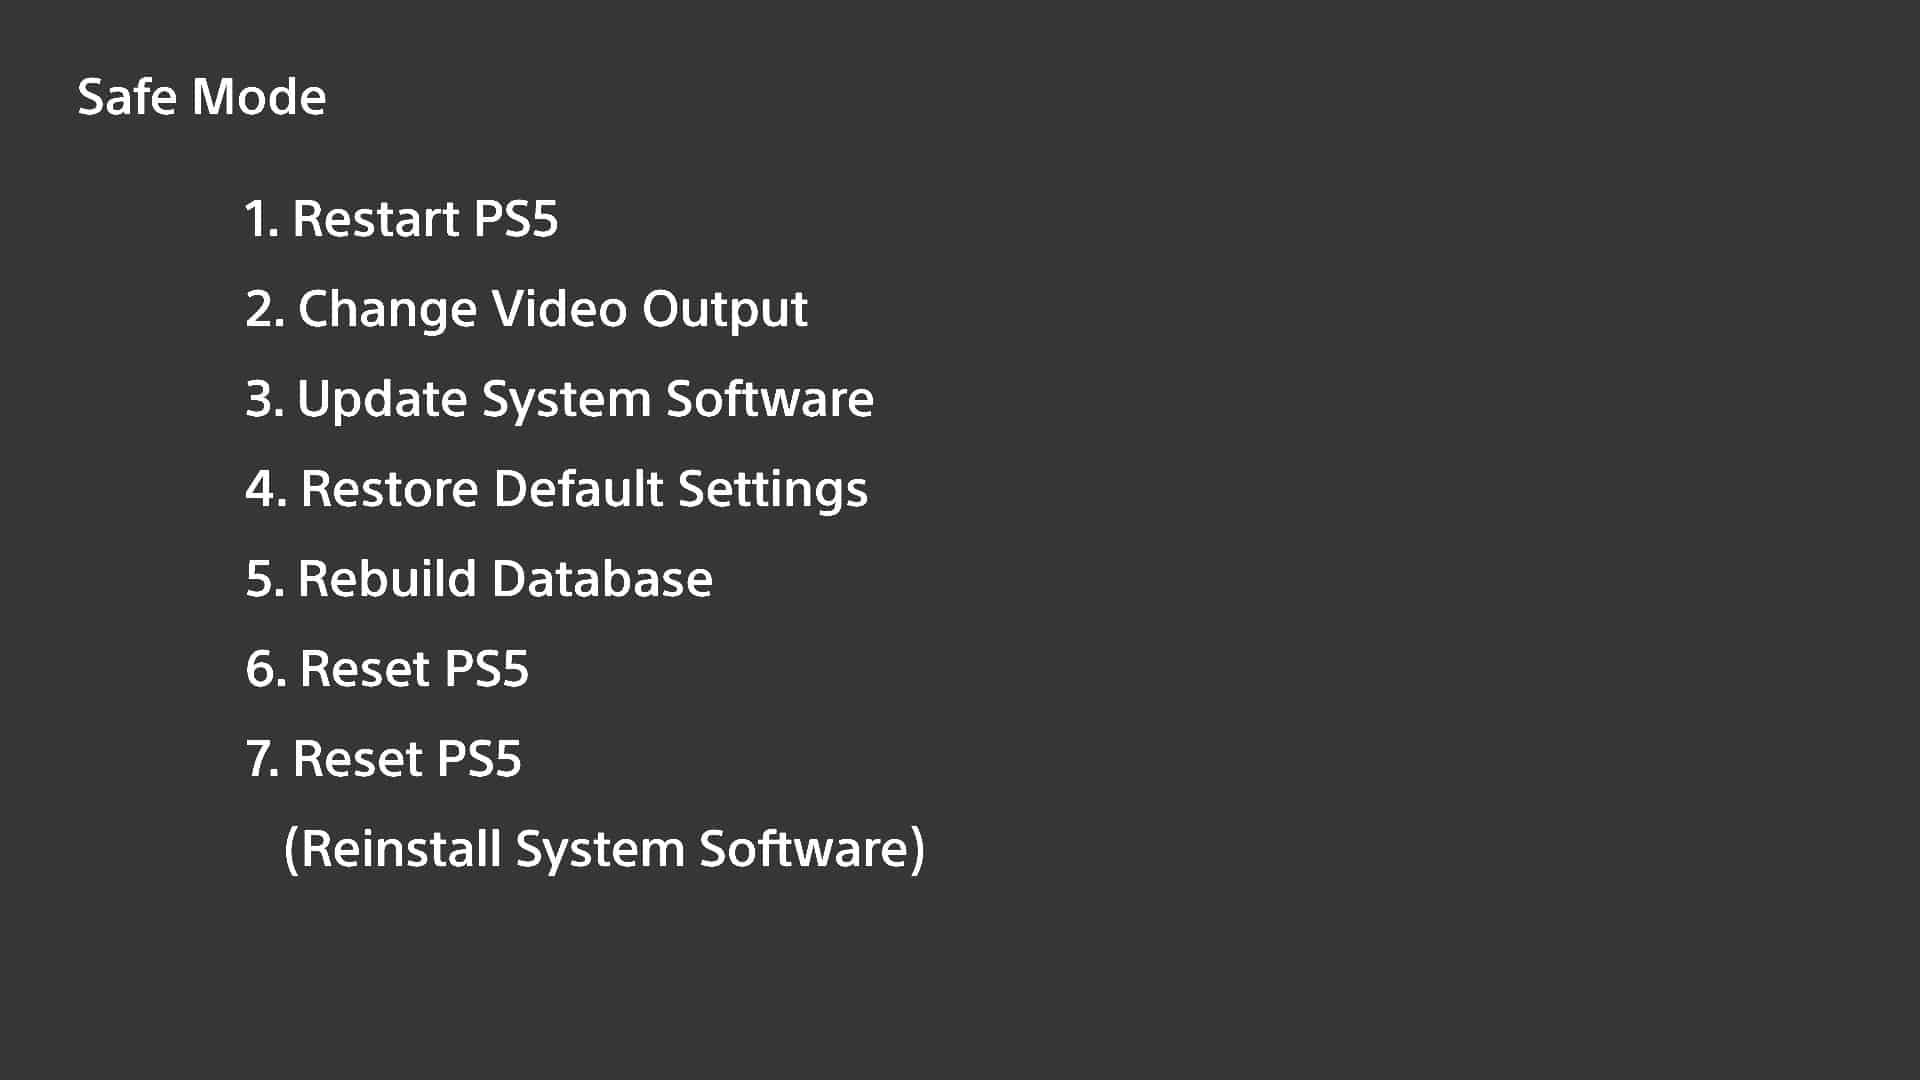 ps5 update system software in safe mode